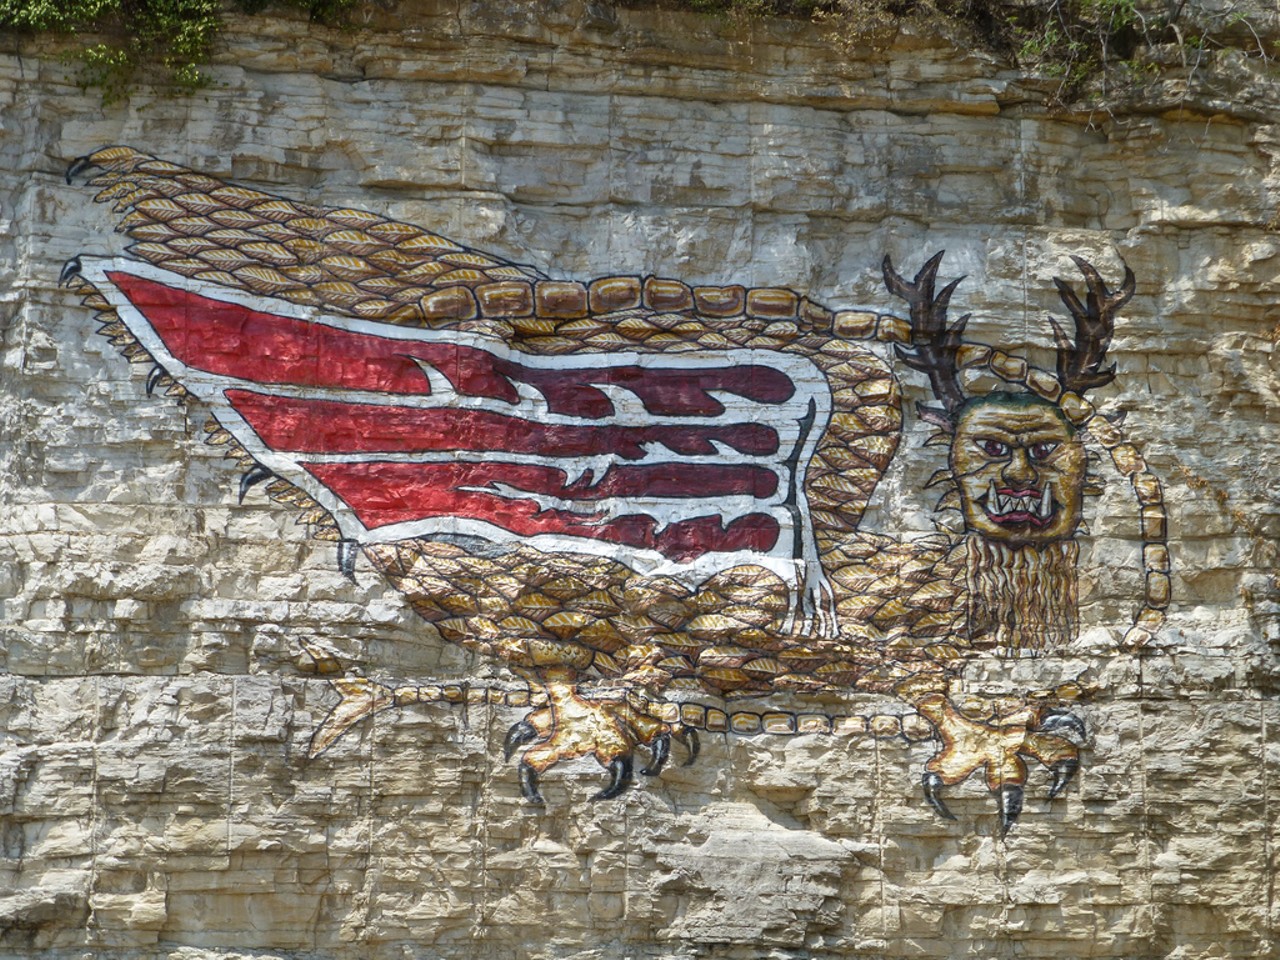 Piasa Bird
IL-100, one mile north of the Alton Visitor Center
Alton, IL 62002
No, you're not hallucinating. That enormous painting of a lion-bird-horse on the Great River Road bluffs just outside of Alton is most definitely real &#151; and completely creepy. Known as the Piasa bird, this ancient Native American mythological creature has a long history of freaking out inhabitants of this part of Alton. Visit the site to find out why. Photo courtesy of Flickr / Mike Linksvayer.